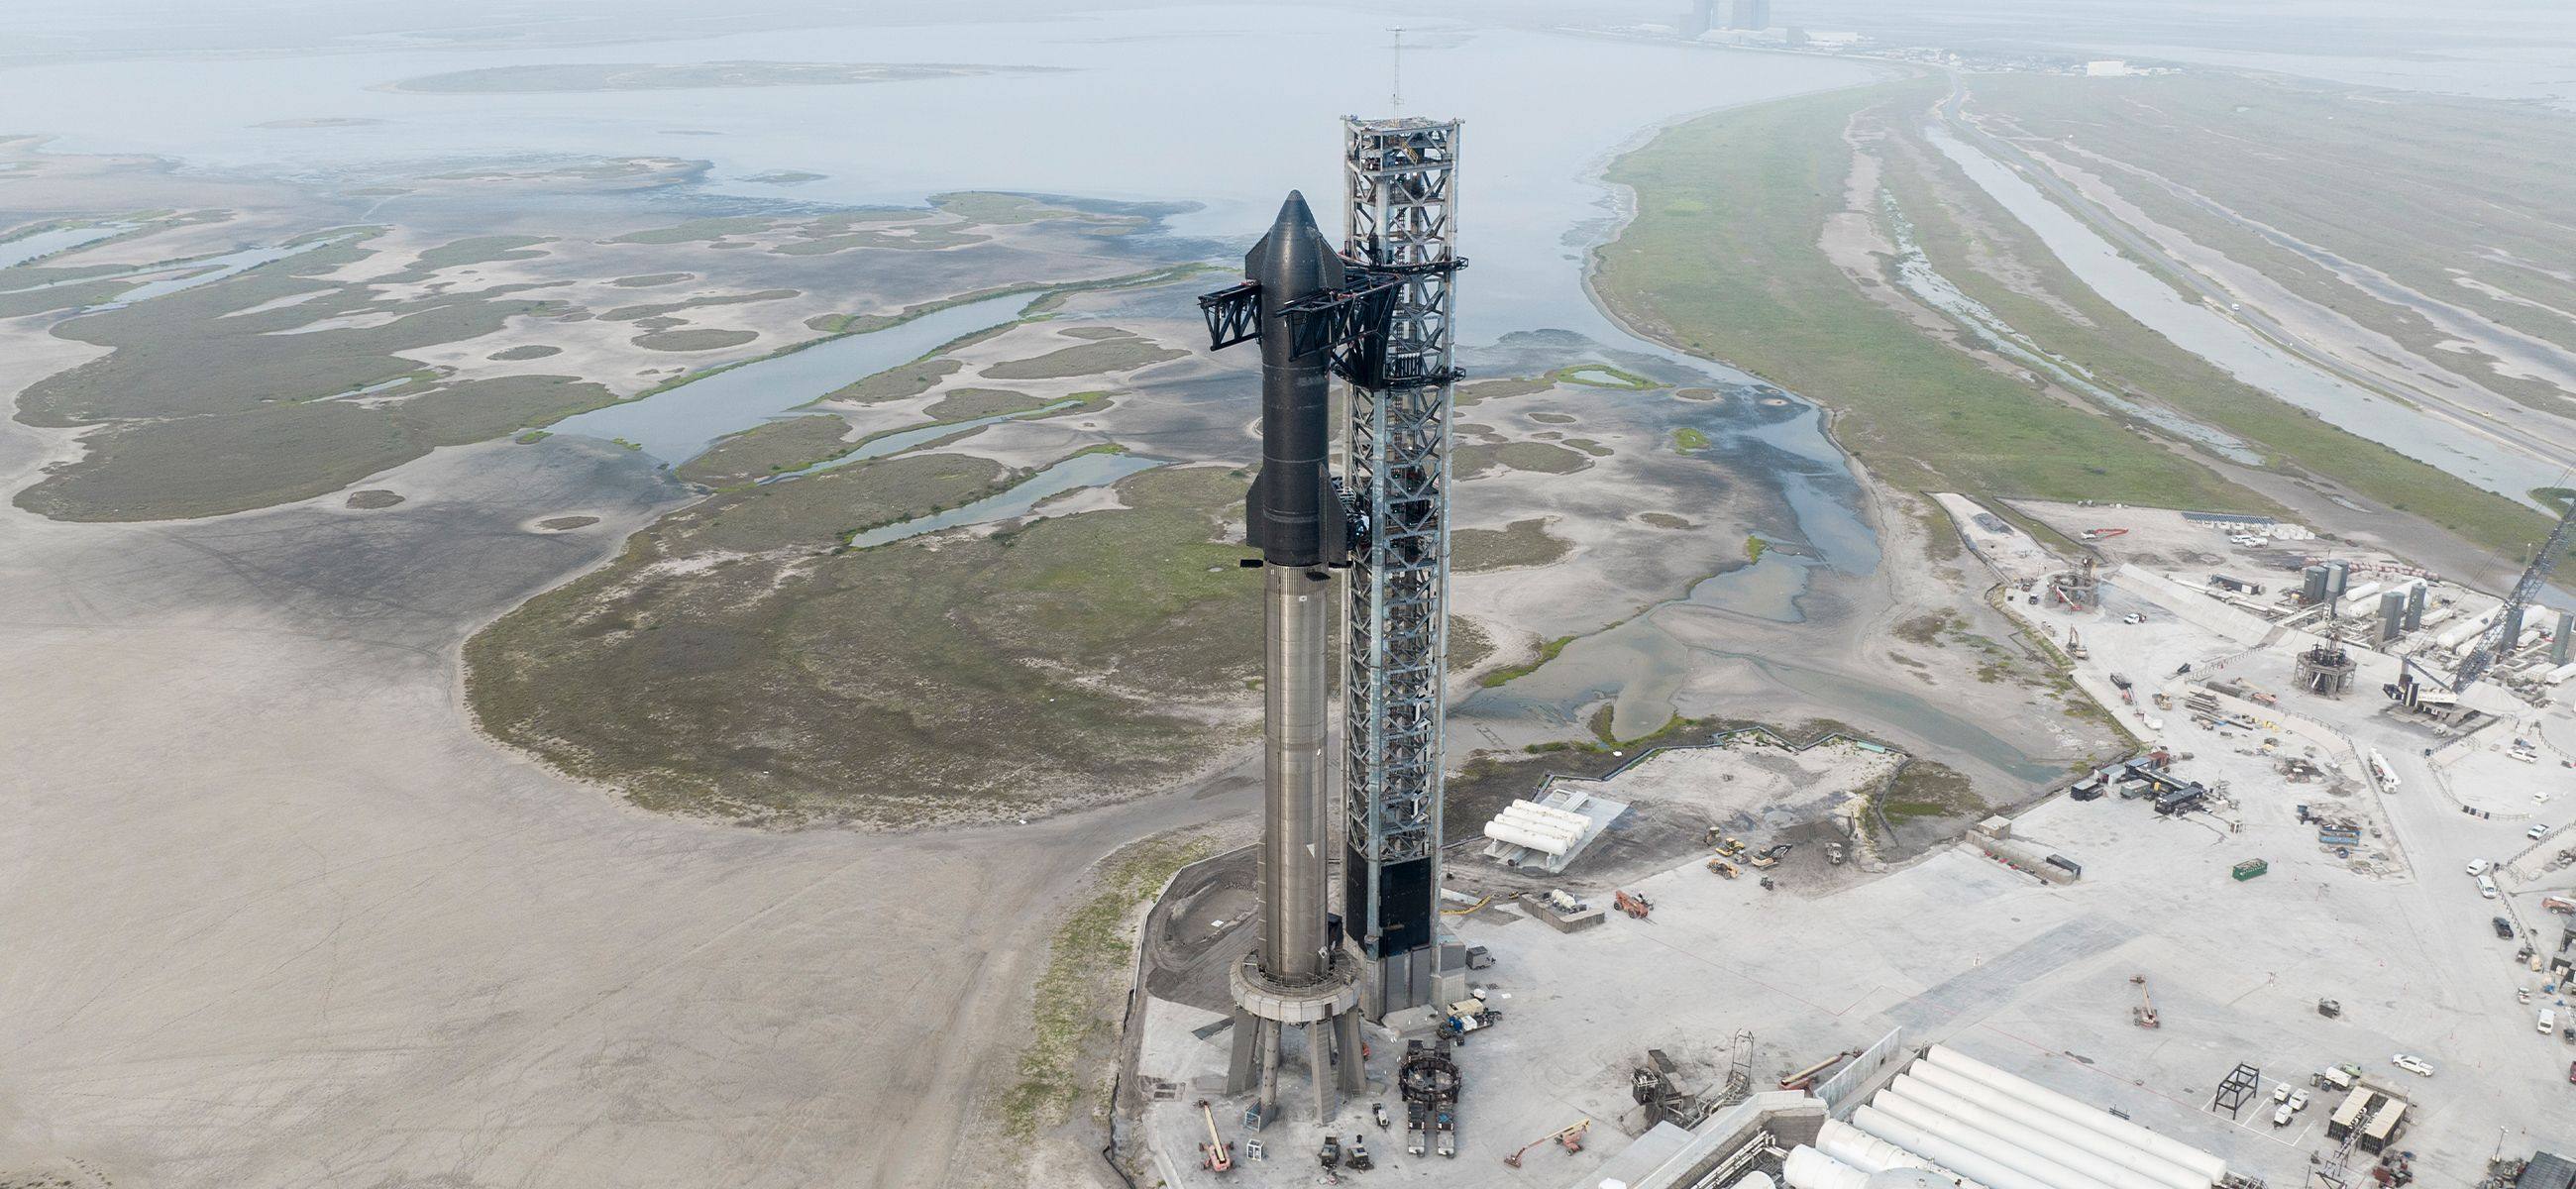 The launch of Starship was called off on Monday not long before the planned lift-off. Credit: SpaceX